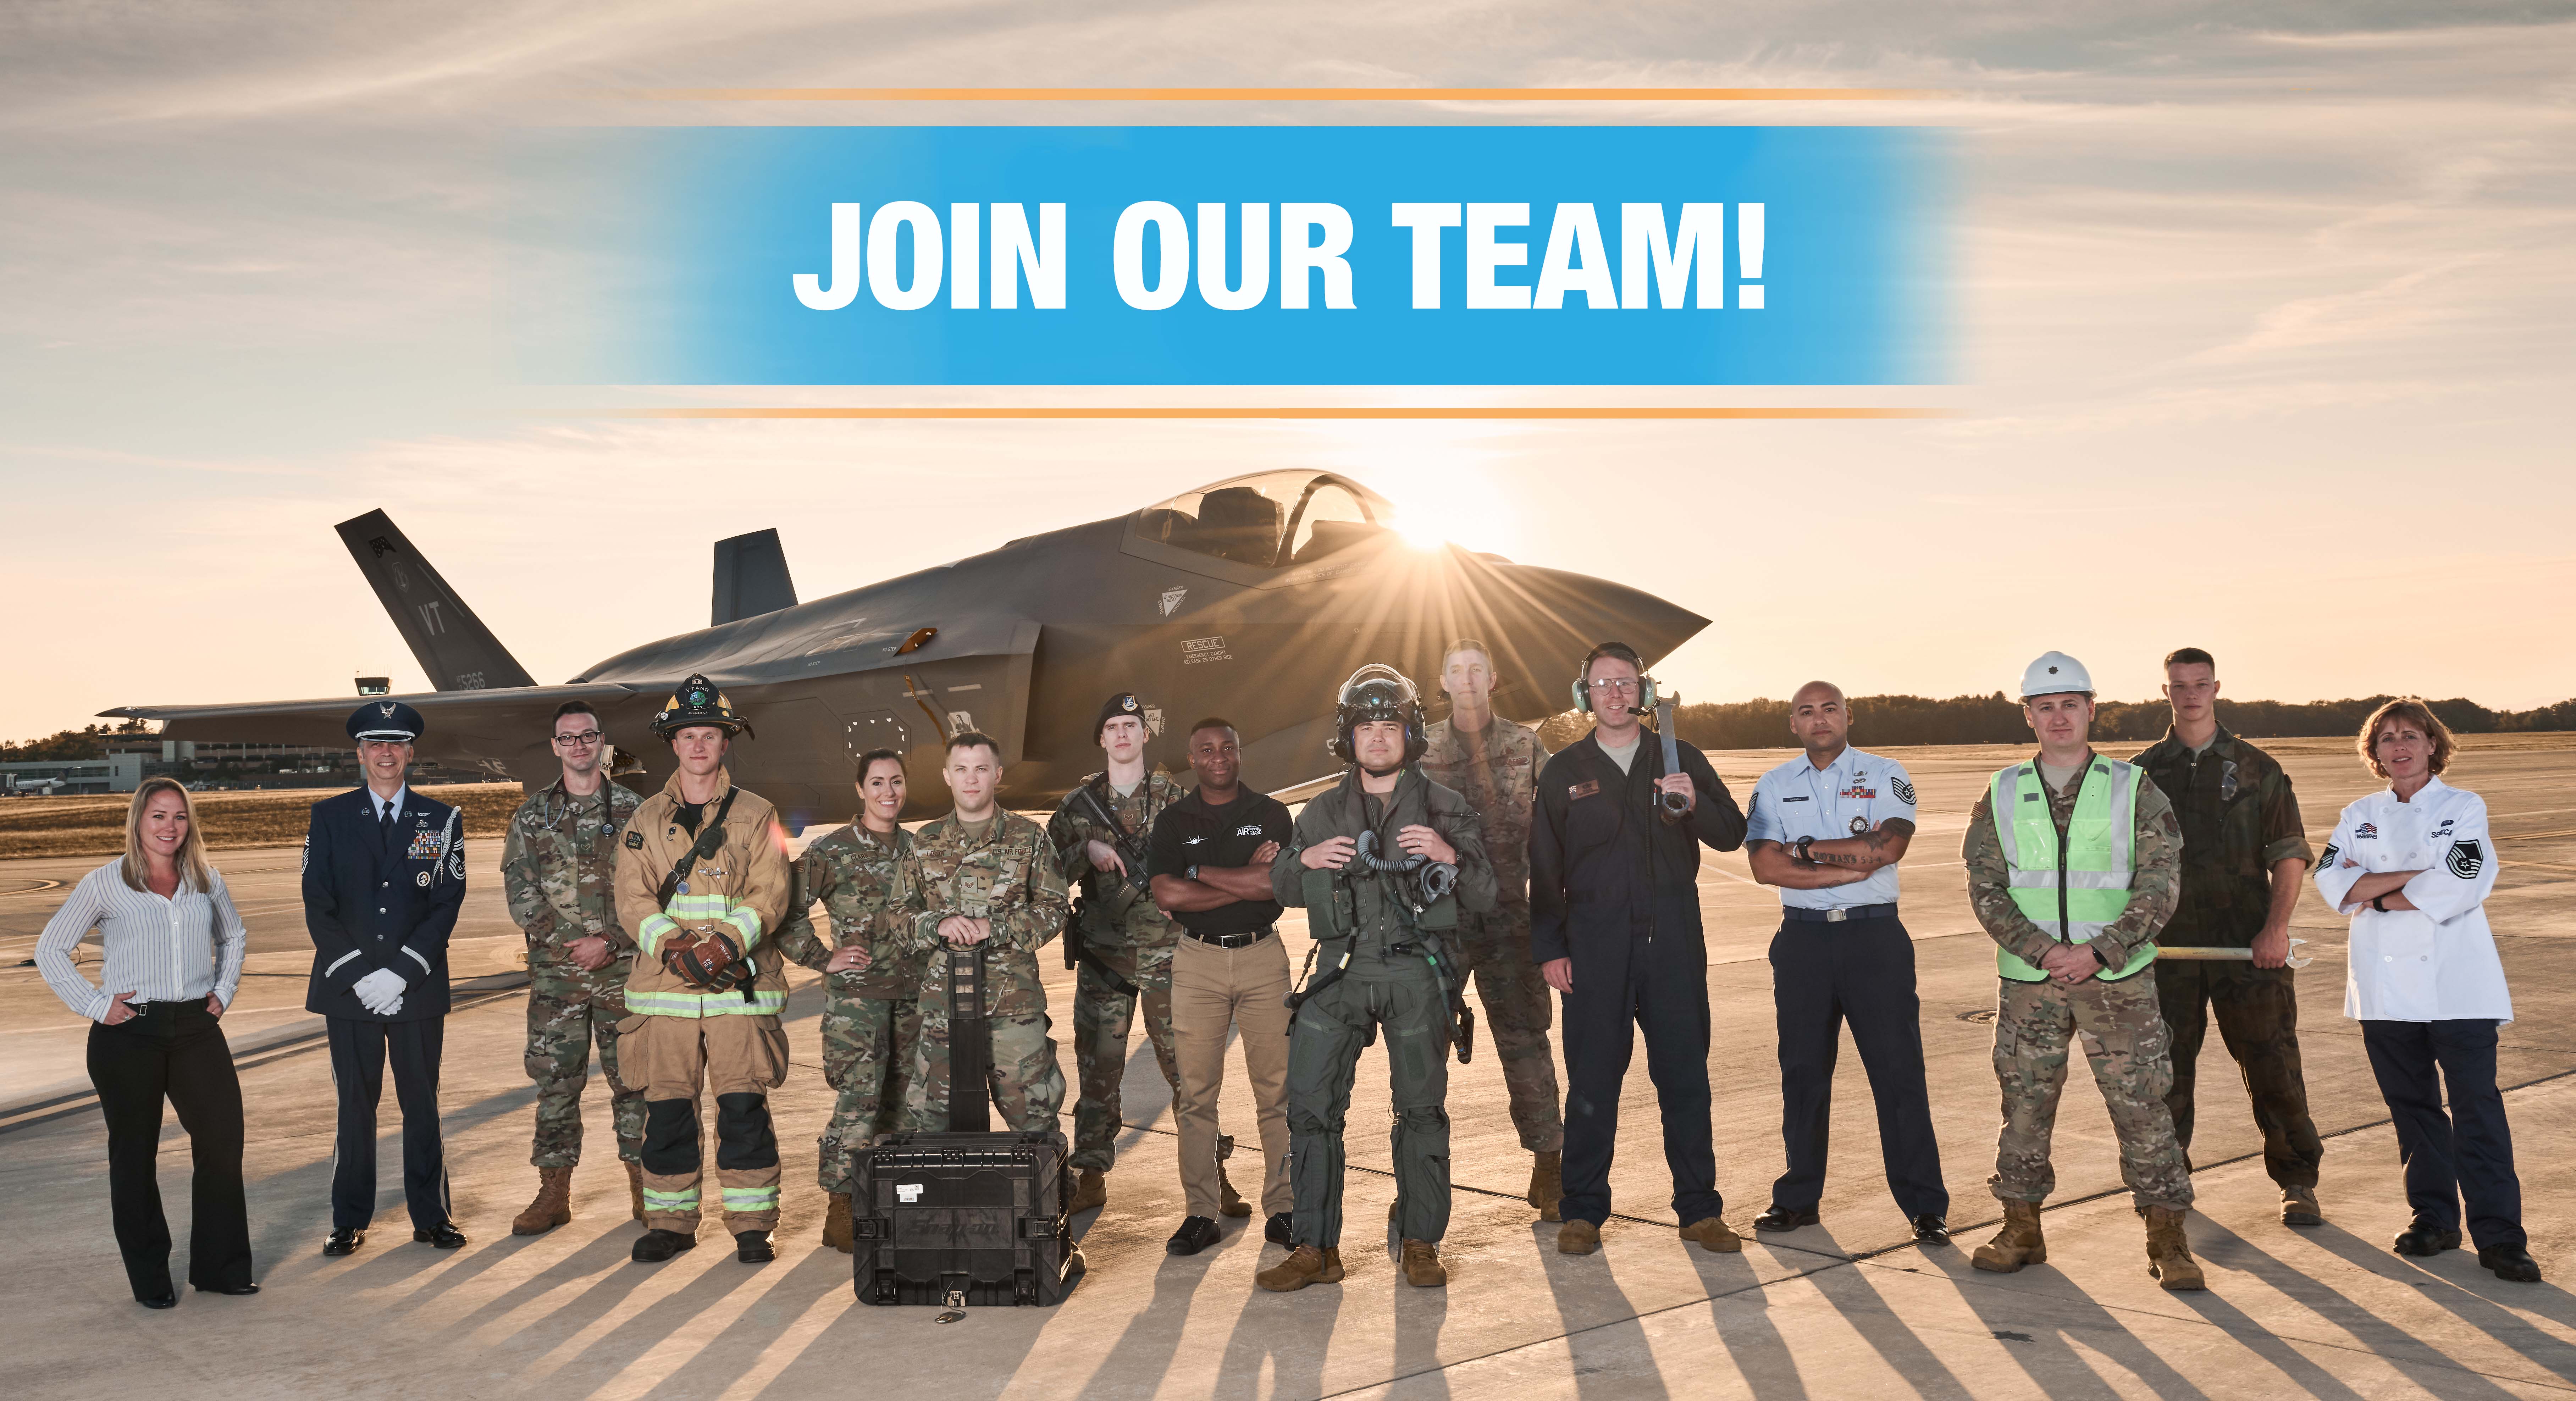 Photo of Airmen from the 158th Fighter Wing standing in front of an F-35 with a banner that states "join our team!"